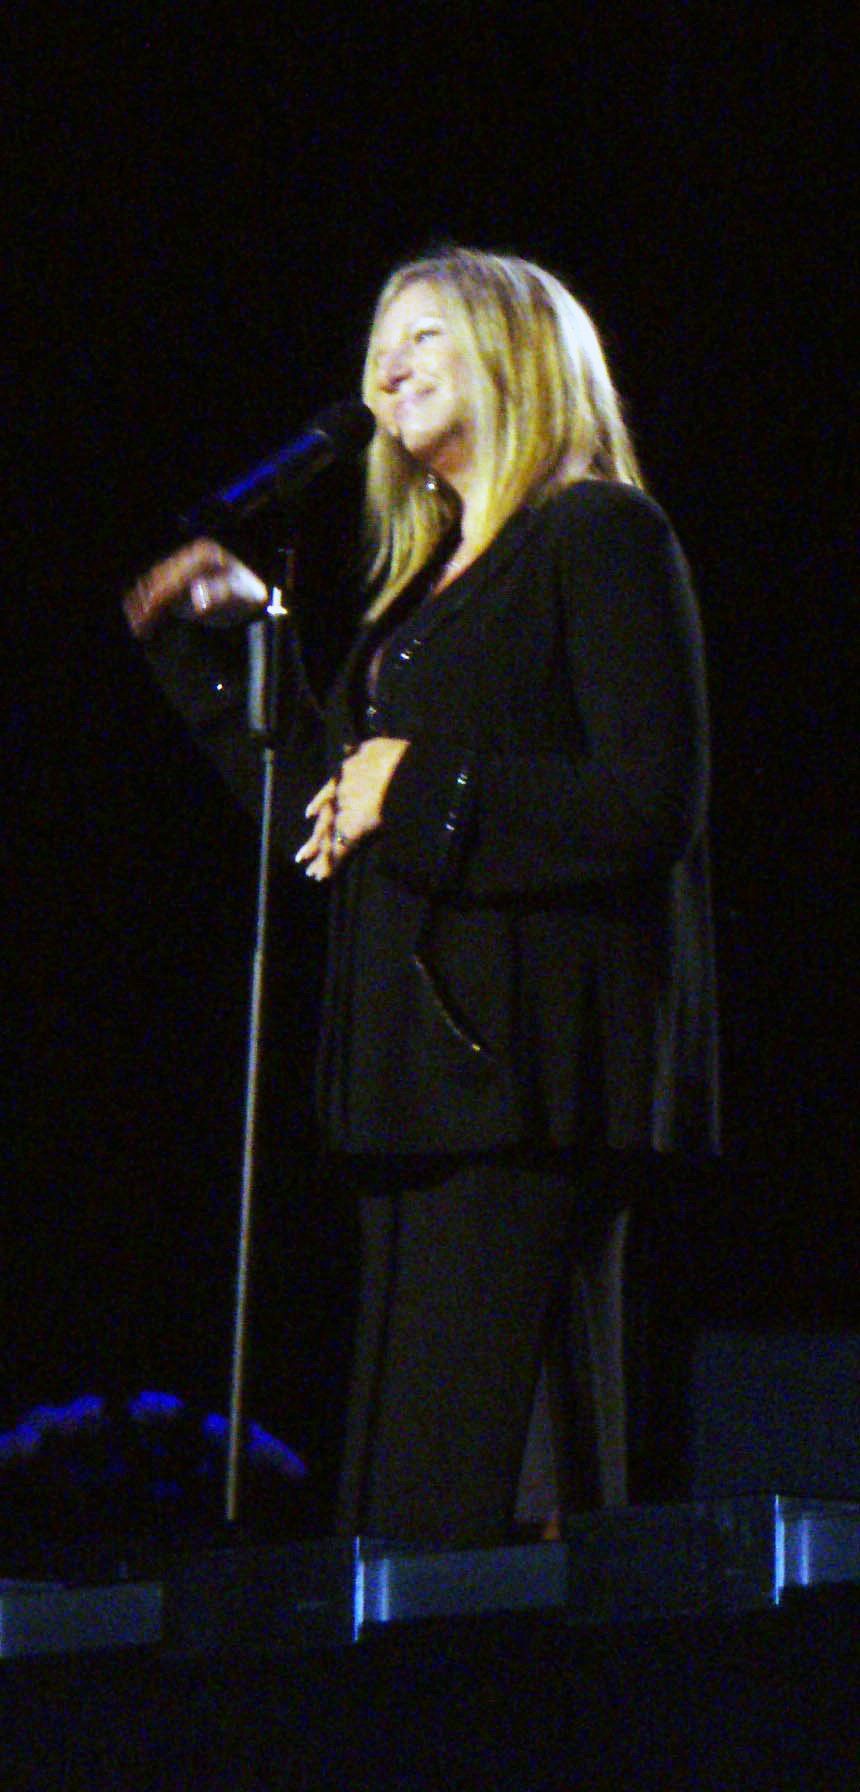 Streisand sings at Ireland's Palladian Mansion, the State Historic Castletown House.